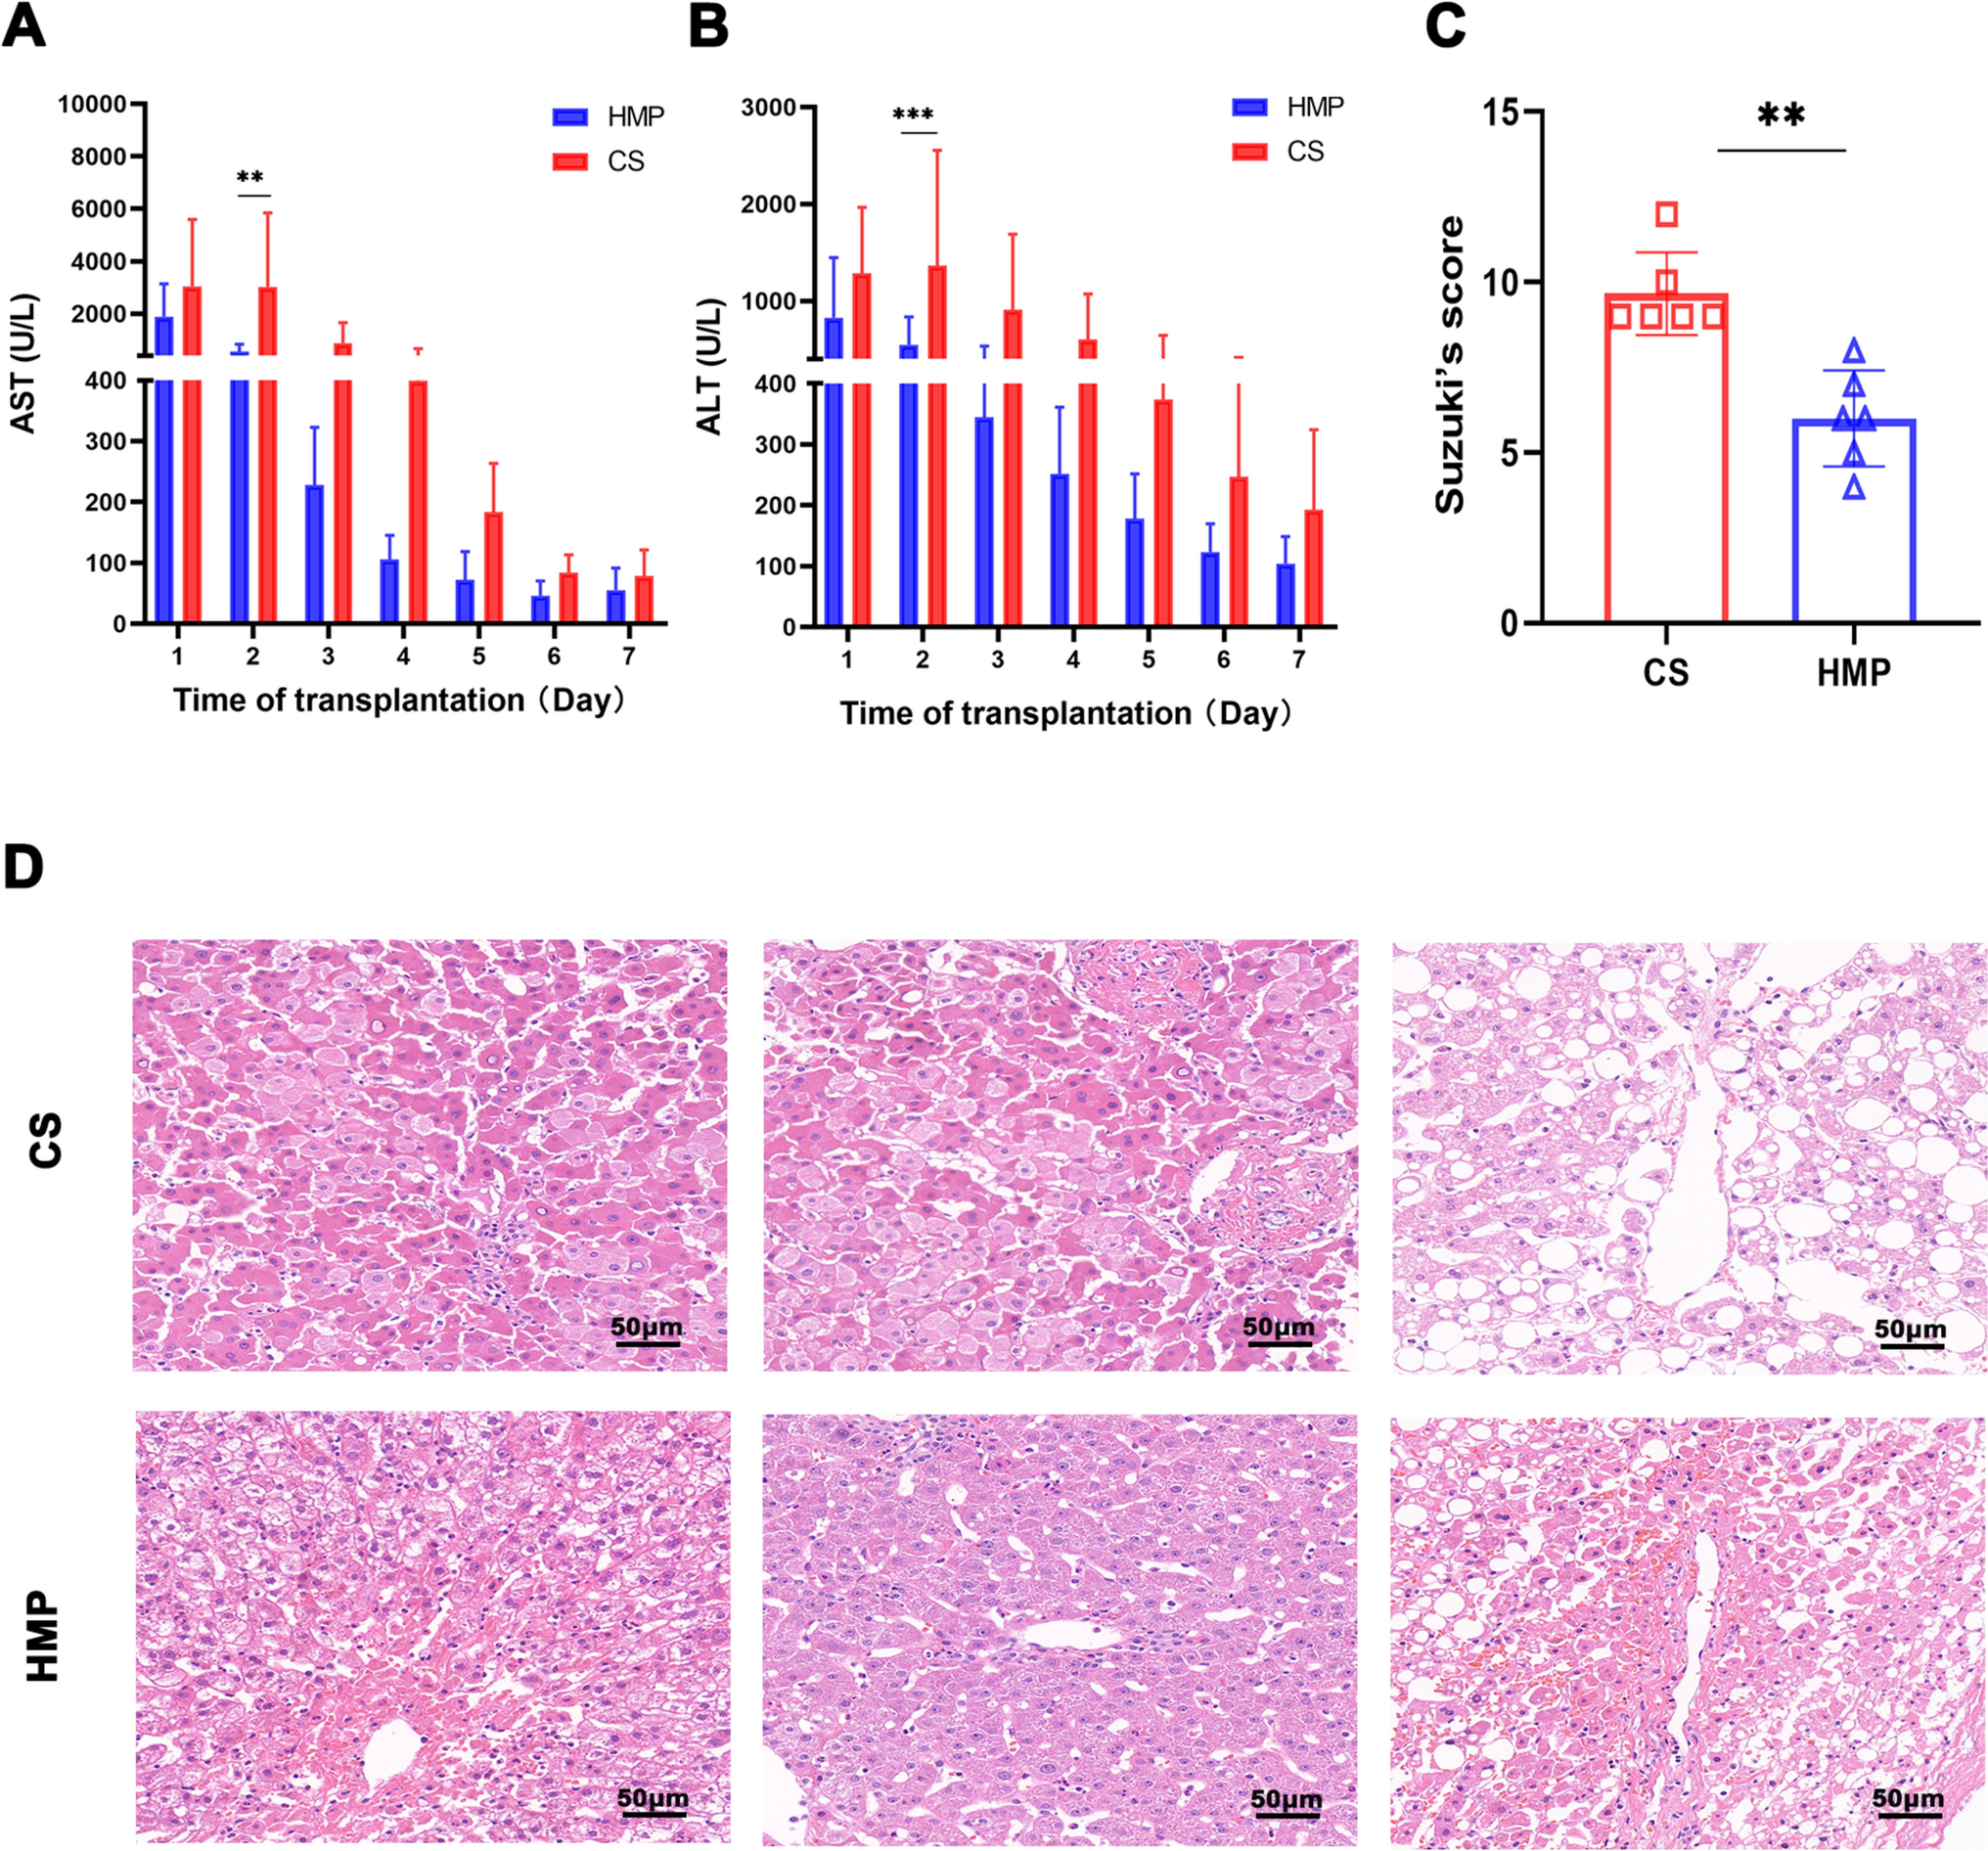 Hypothermic machine perfusion reduces donation after circulatory death liver ischemia–reperfusion injury through the SERPINA3-mediated PI3Kδ/Akt pathway